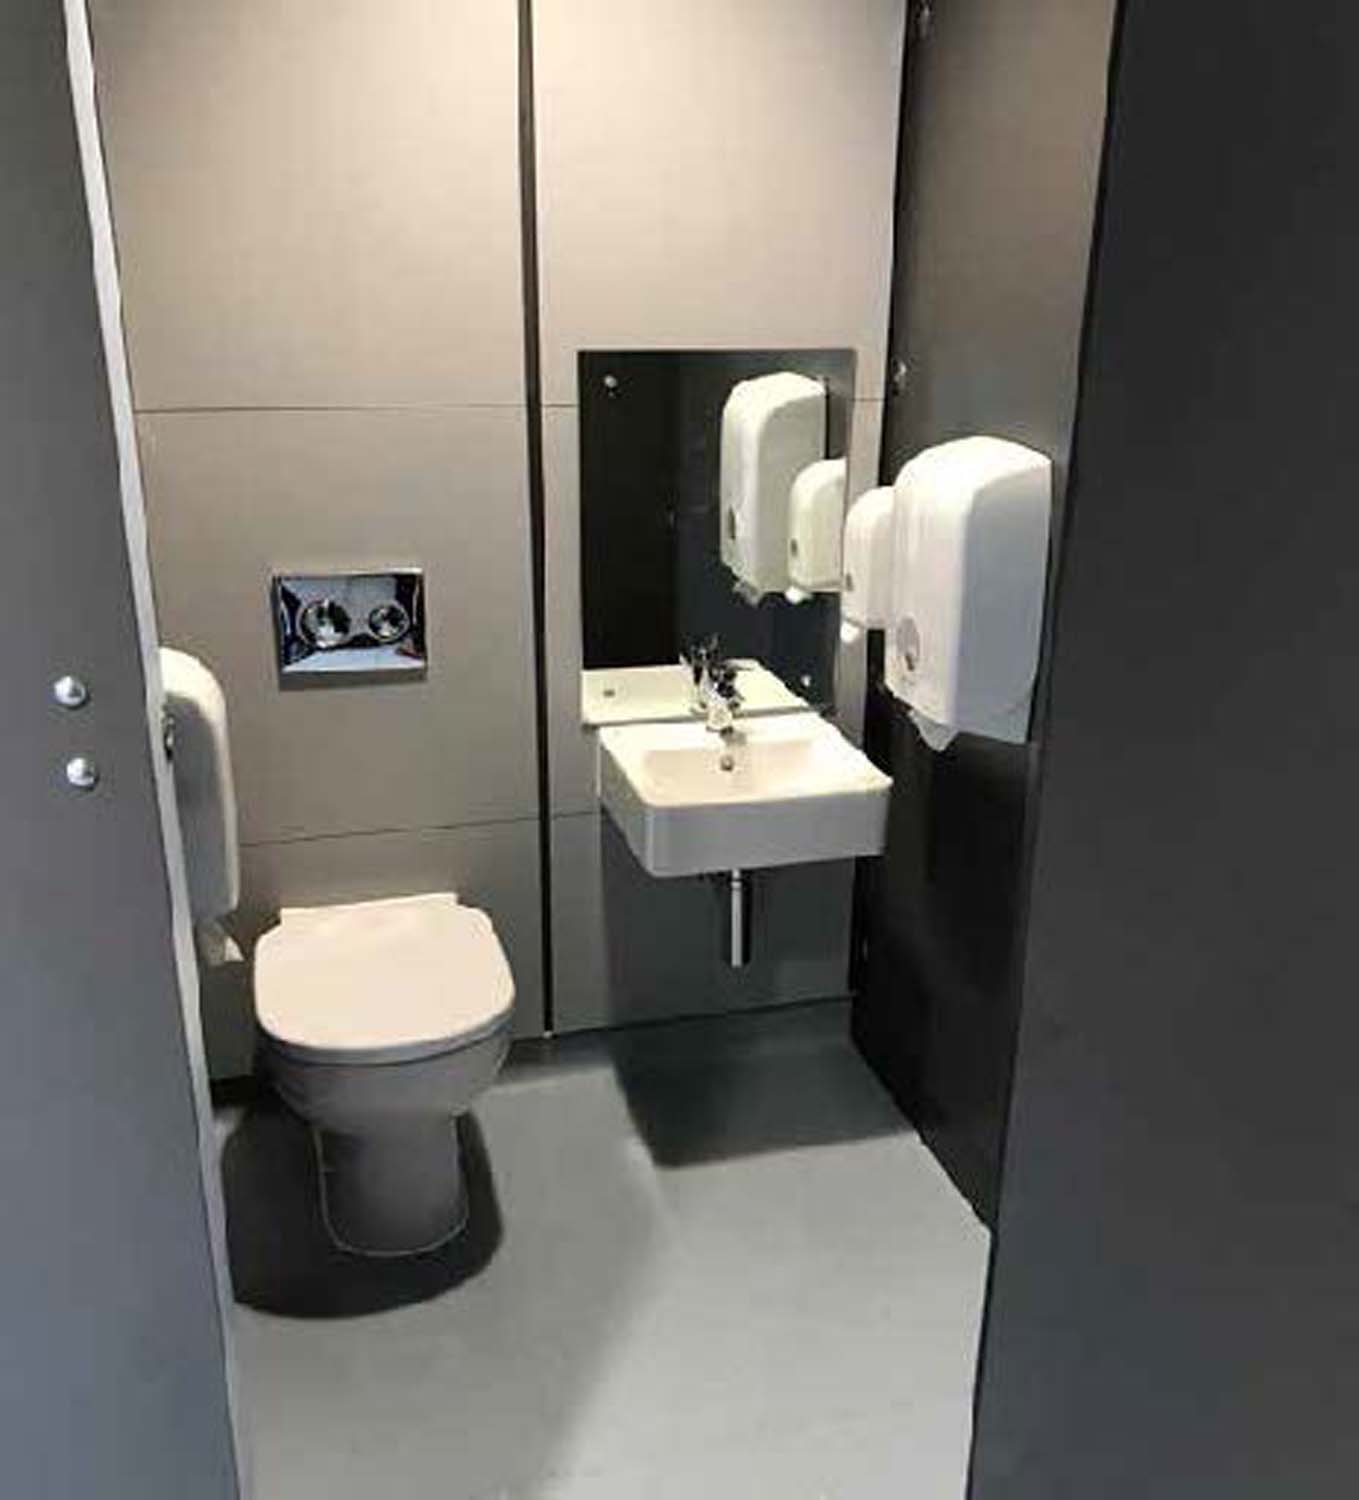 A toilet cubicle with an integrated wash-hand basin.